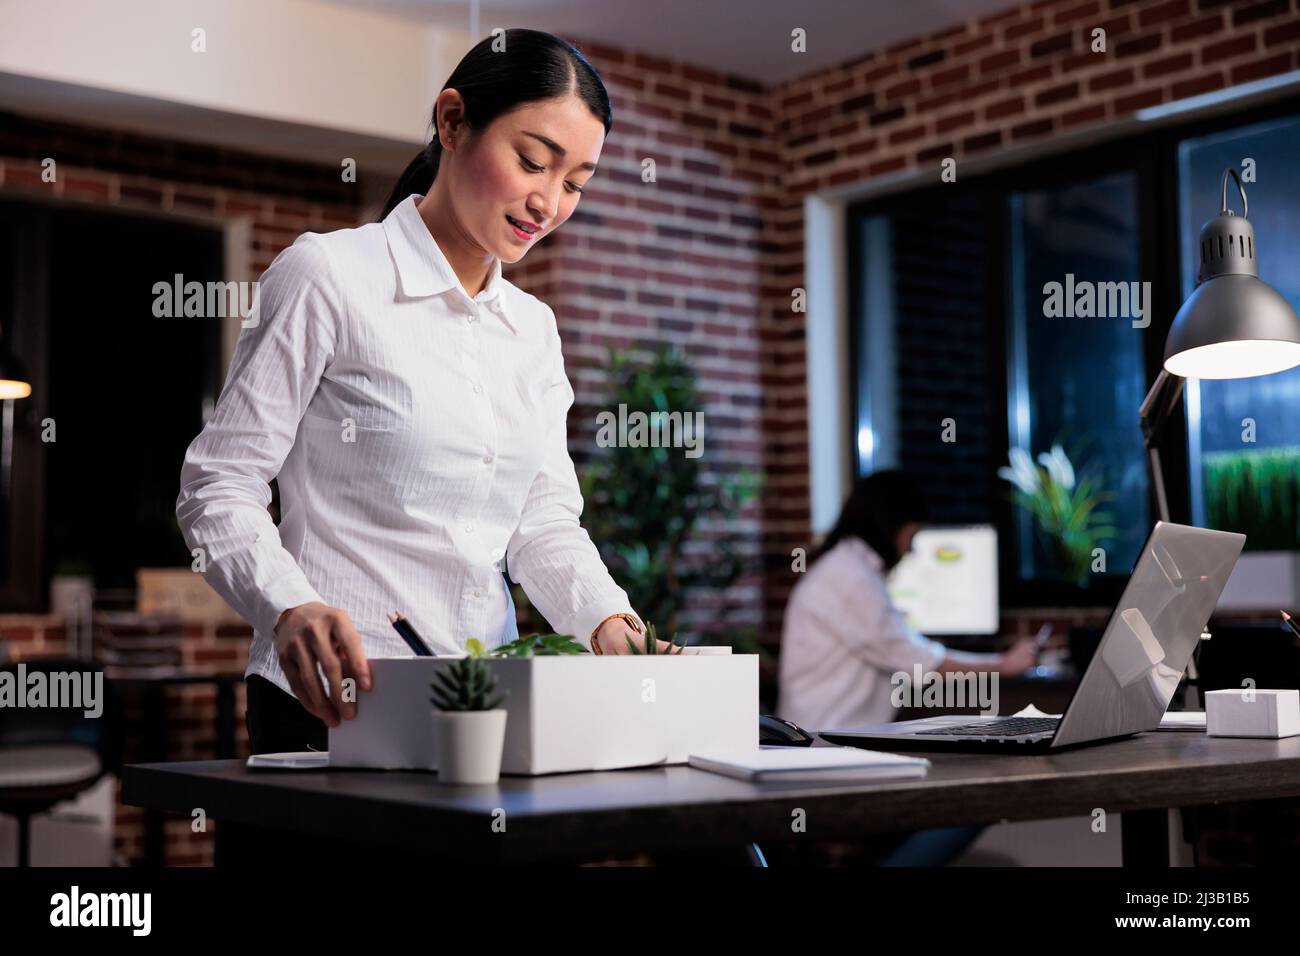 Dismissed business company employee putting personal stuff in cardboard box because of project failure. Fired businesswoman packing personal belongings because of workplace financial problems. Stock Photo